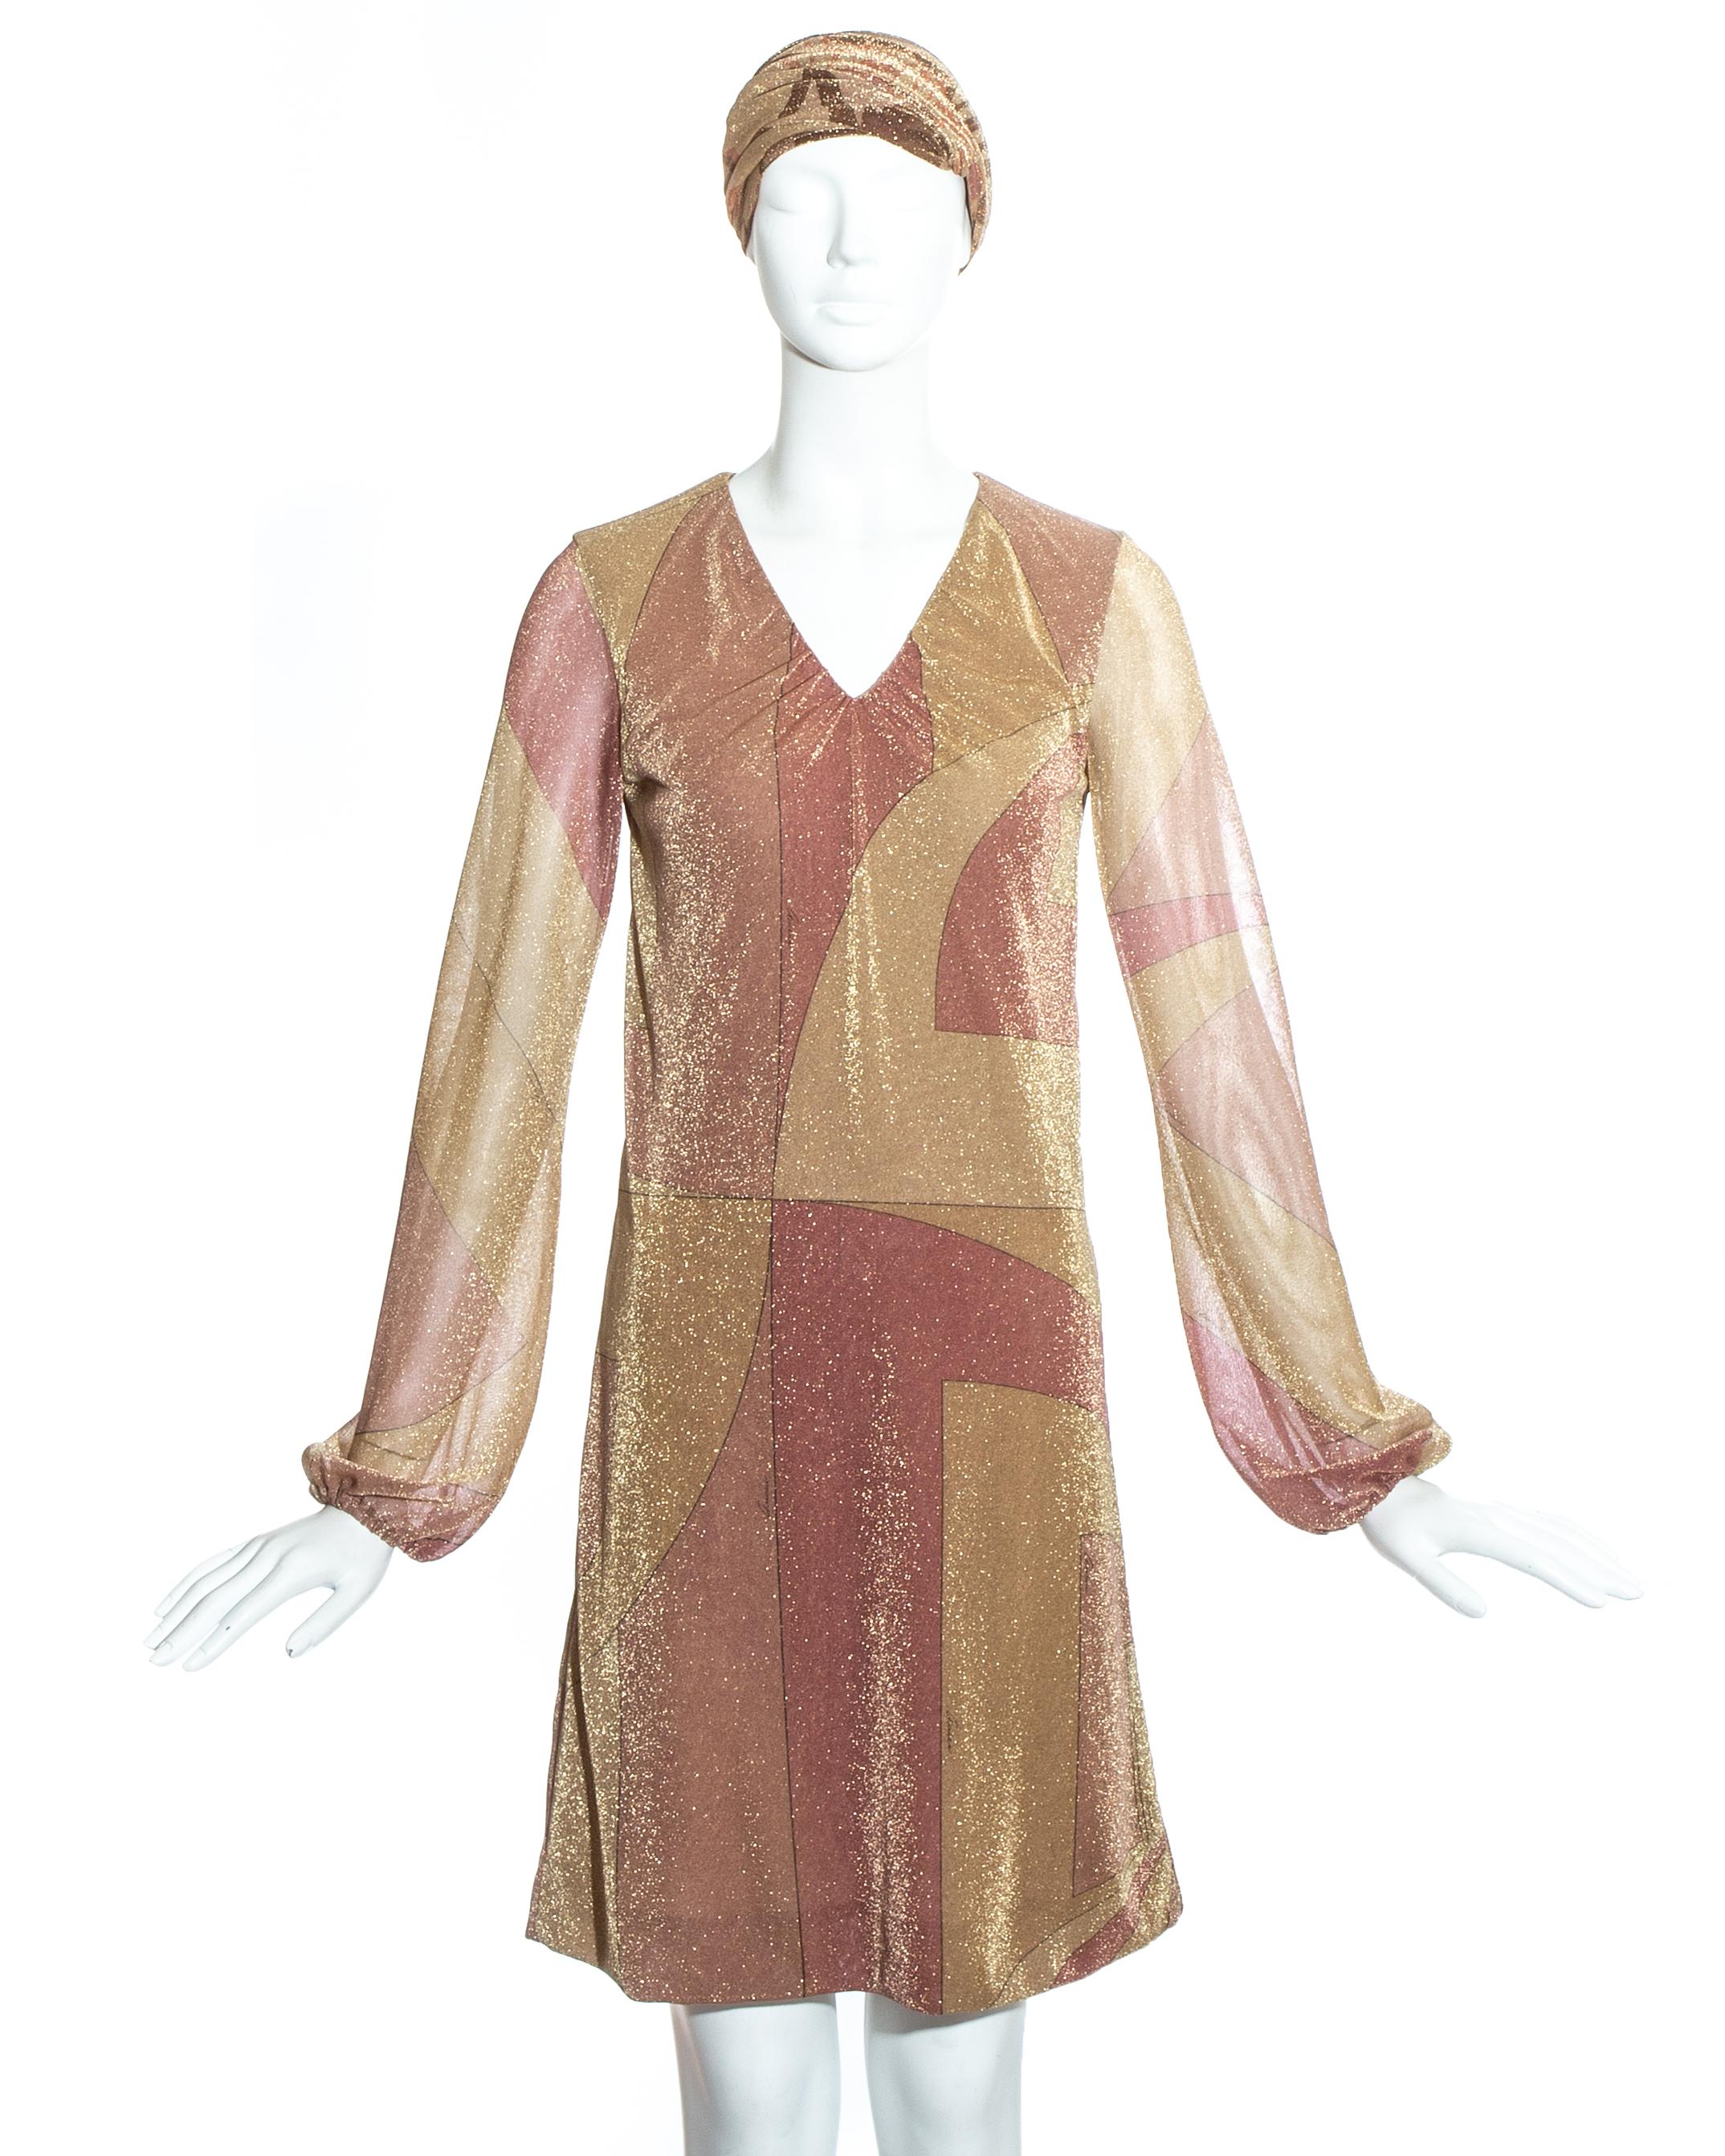 Gucci by Tom Ford pink and gold printed lurex shift dress with matching head scarf.

Fall-Winter 2000